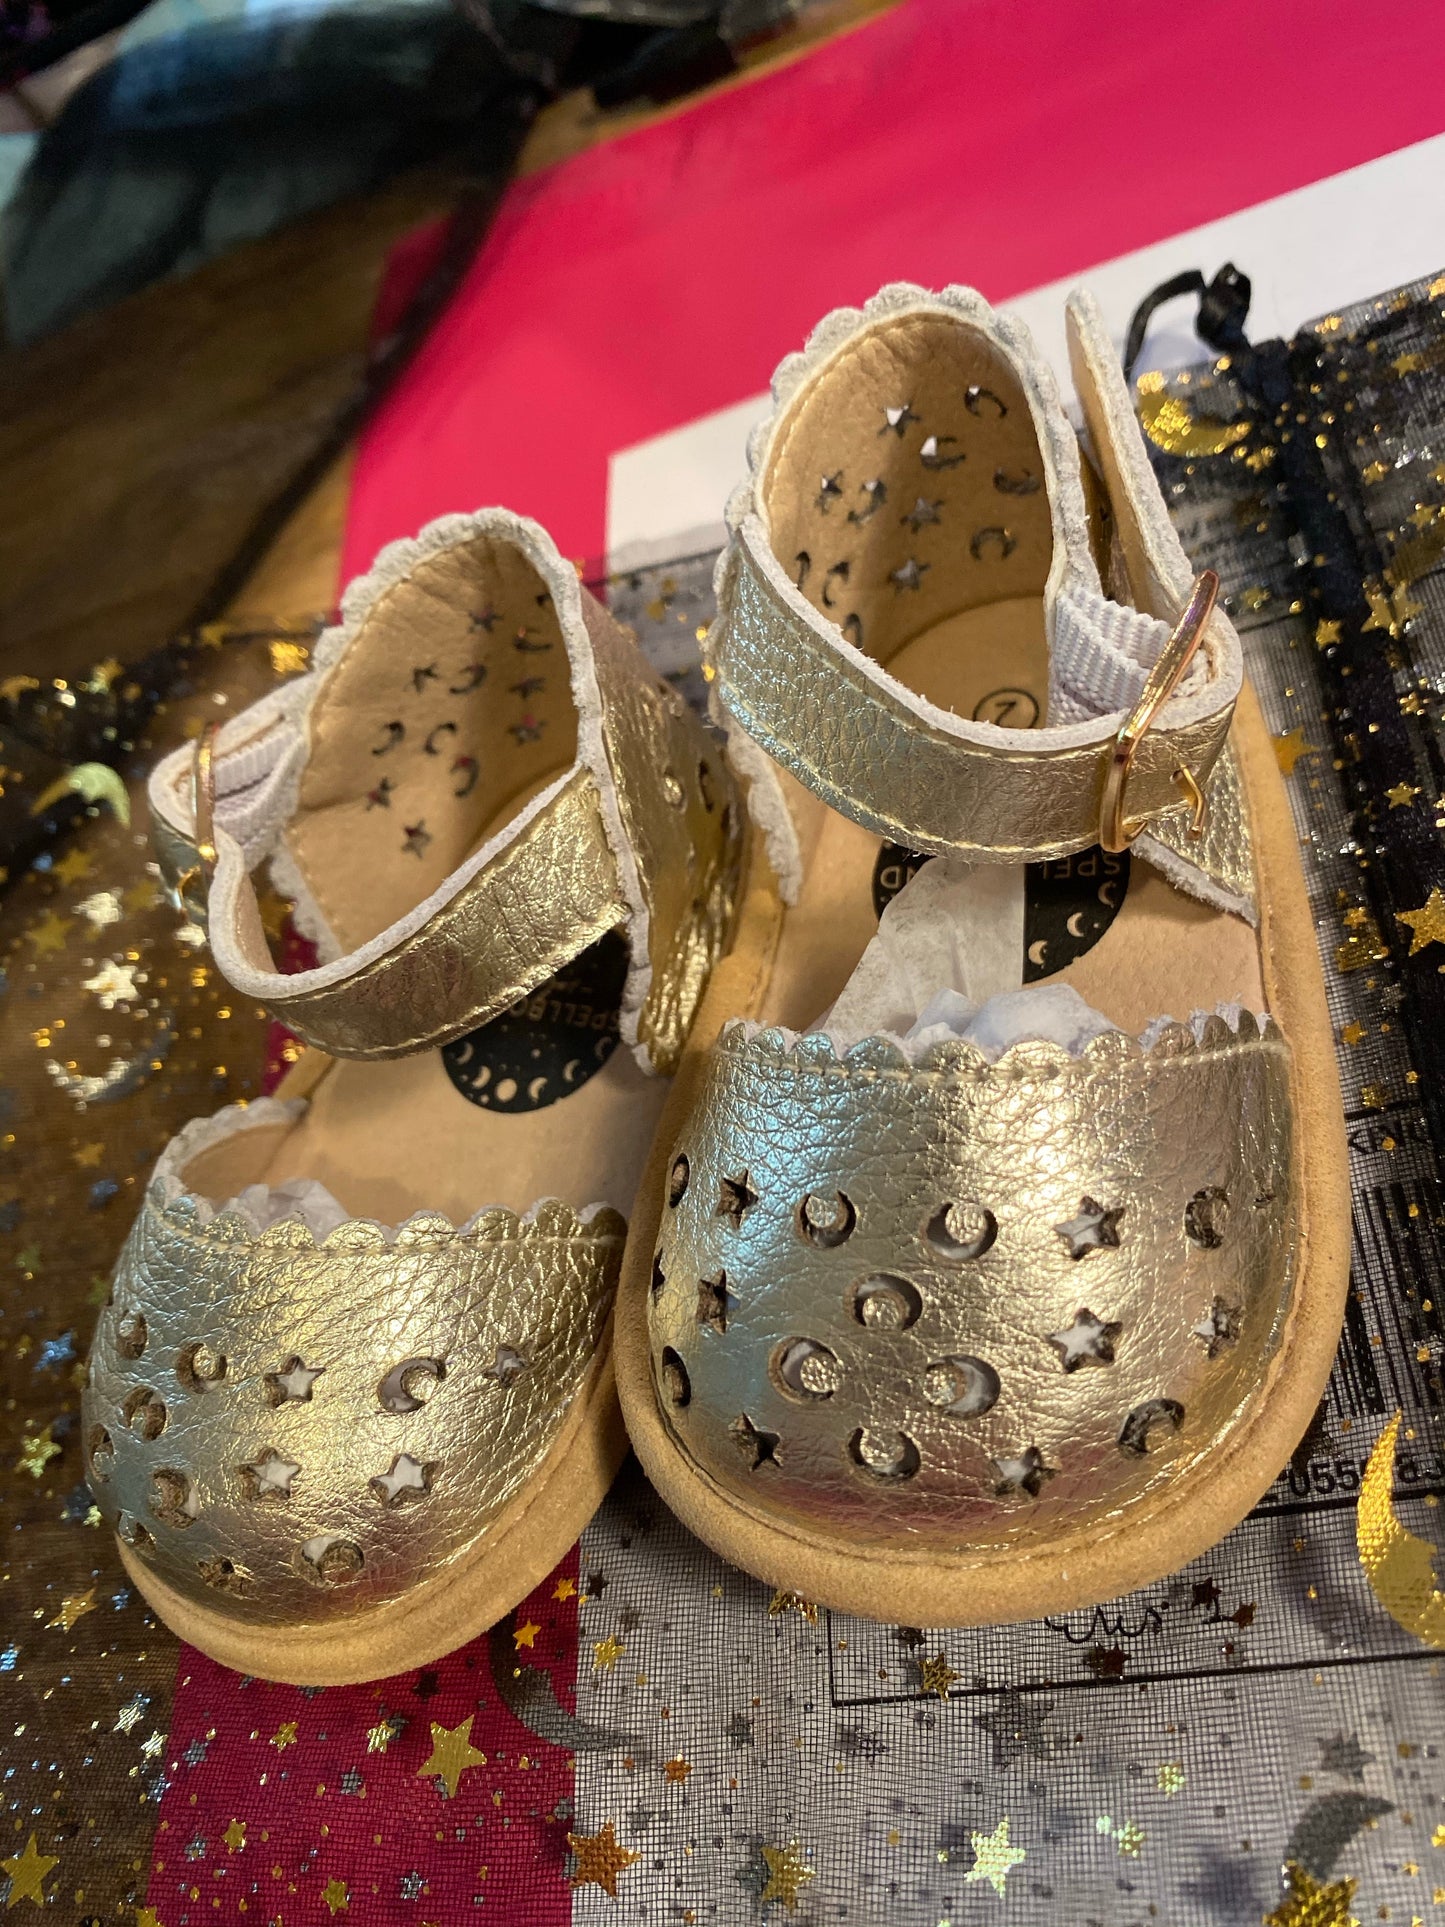 The Eris Sandal- Champagne Leather with Moons + Stars